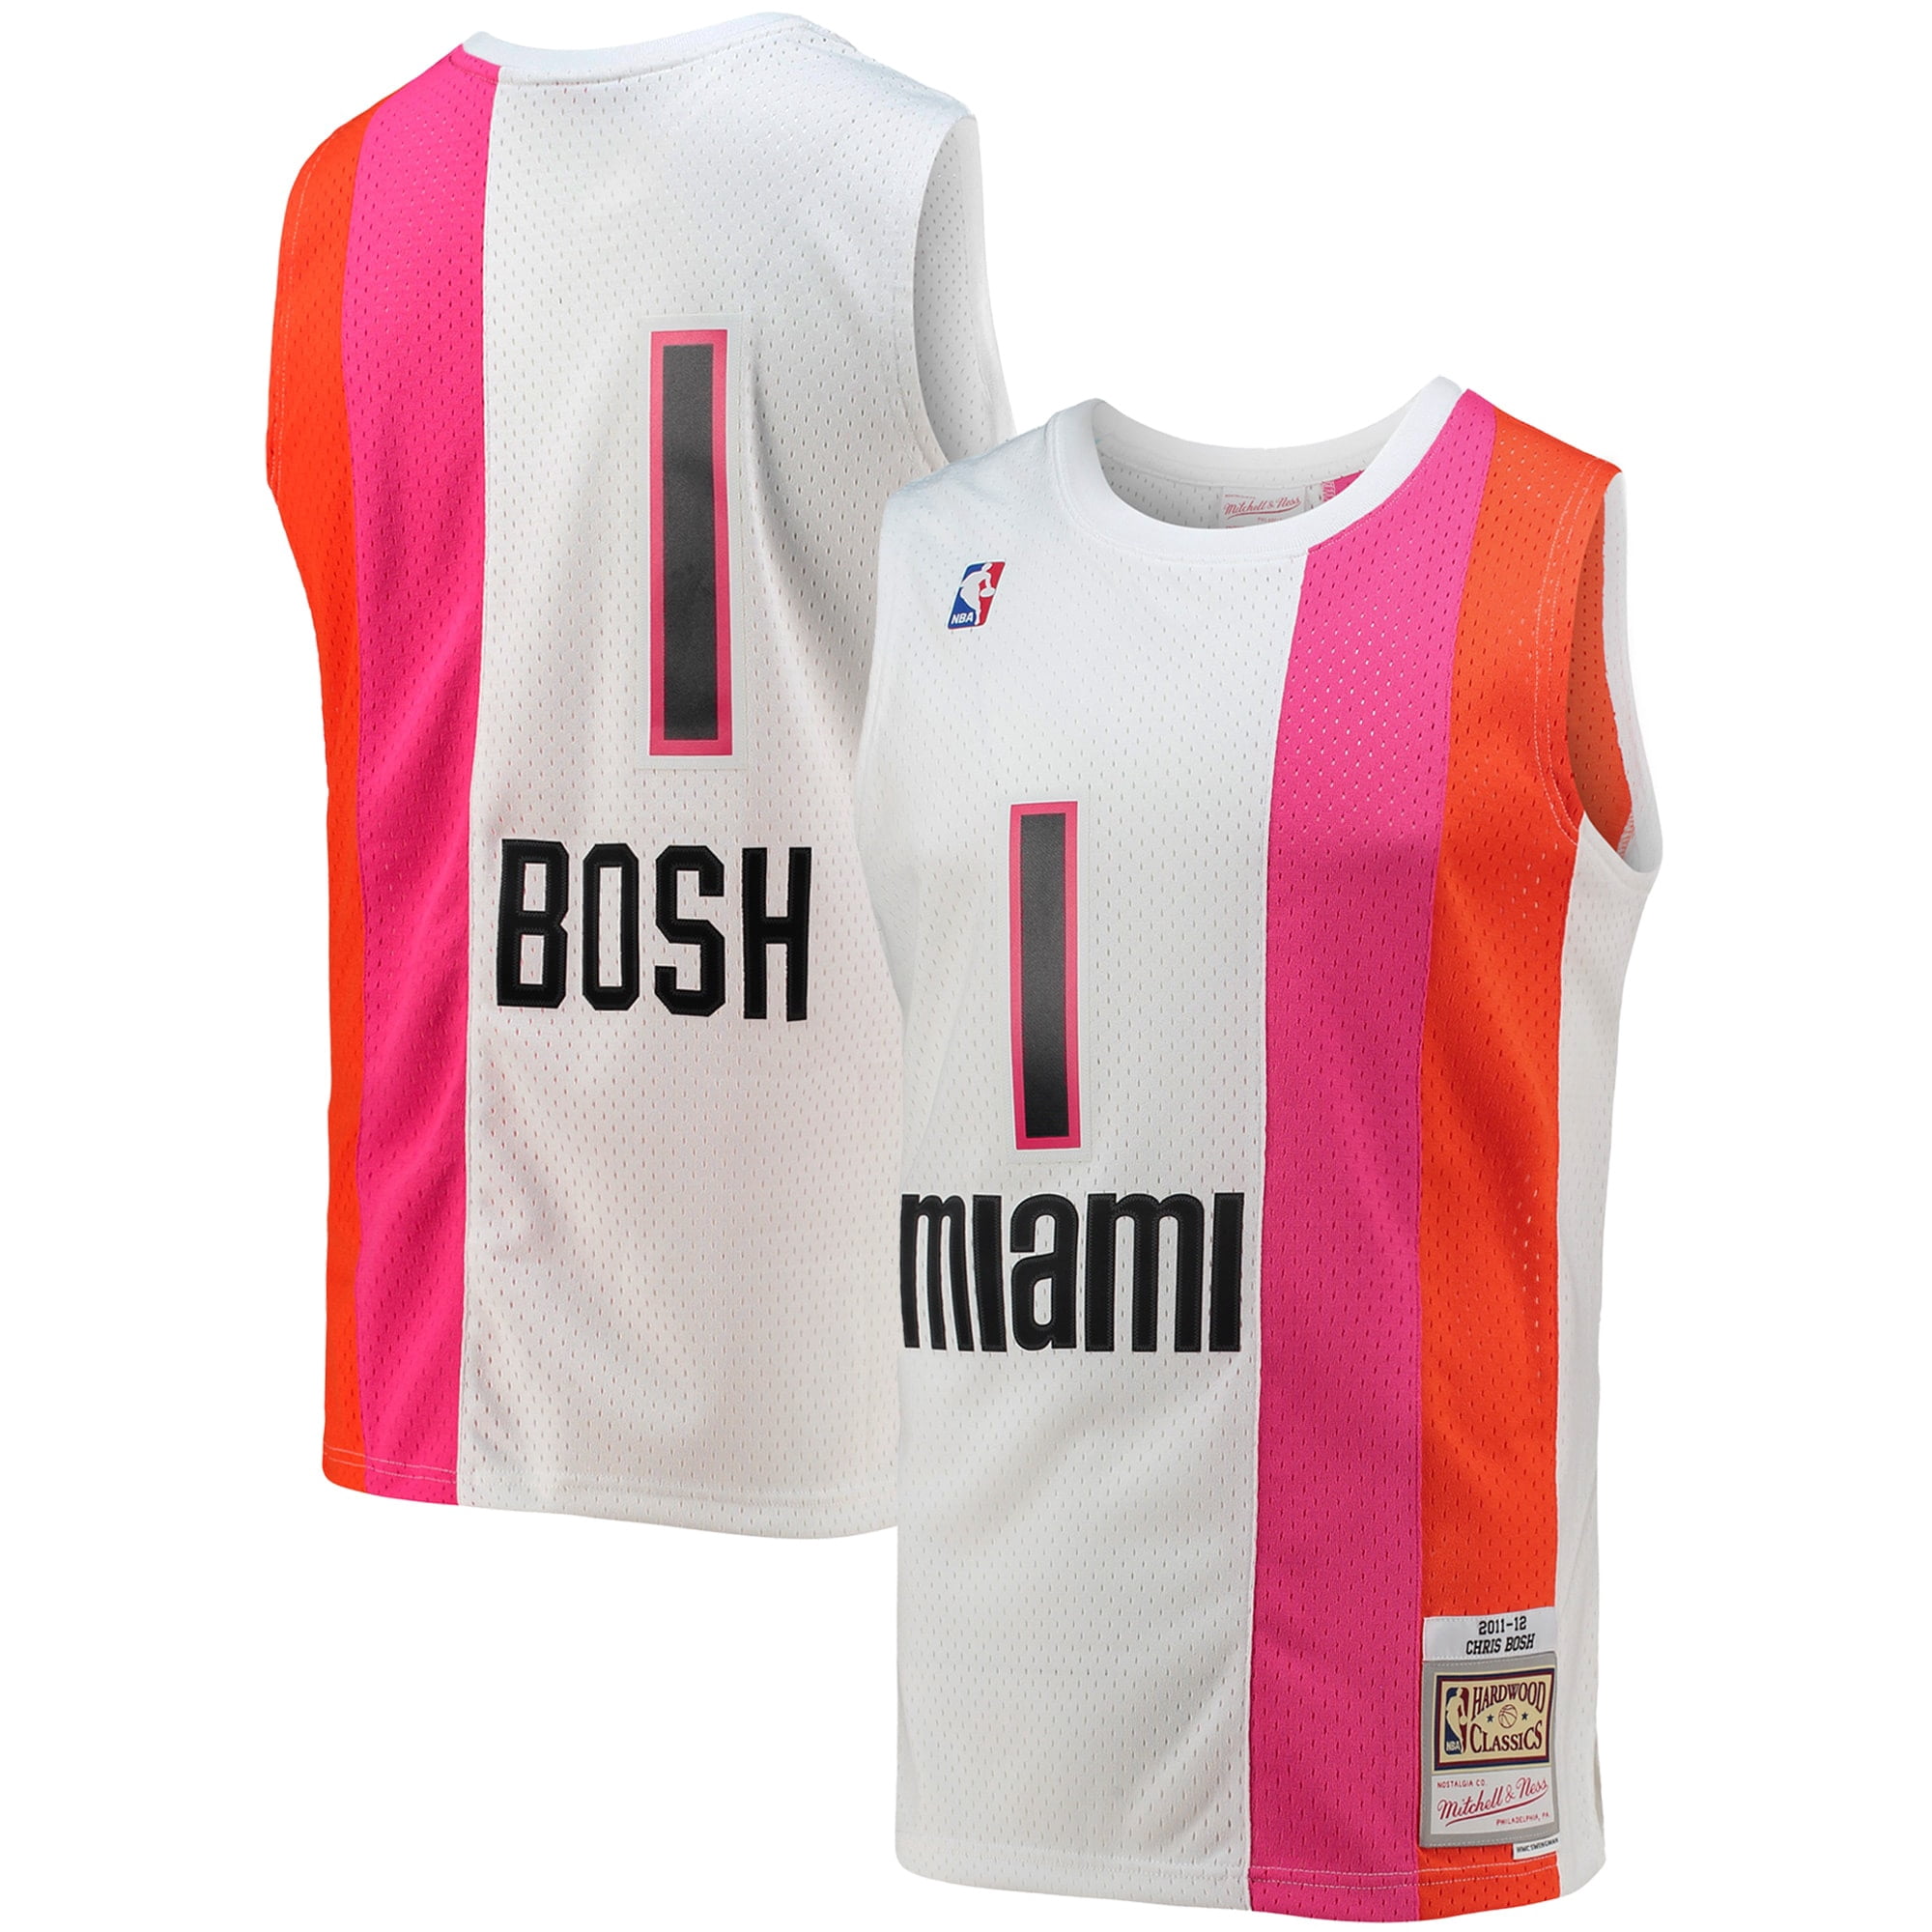 heat white out jersey